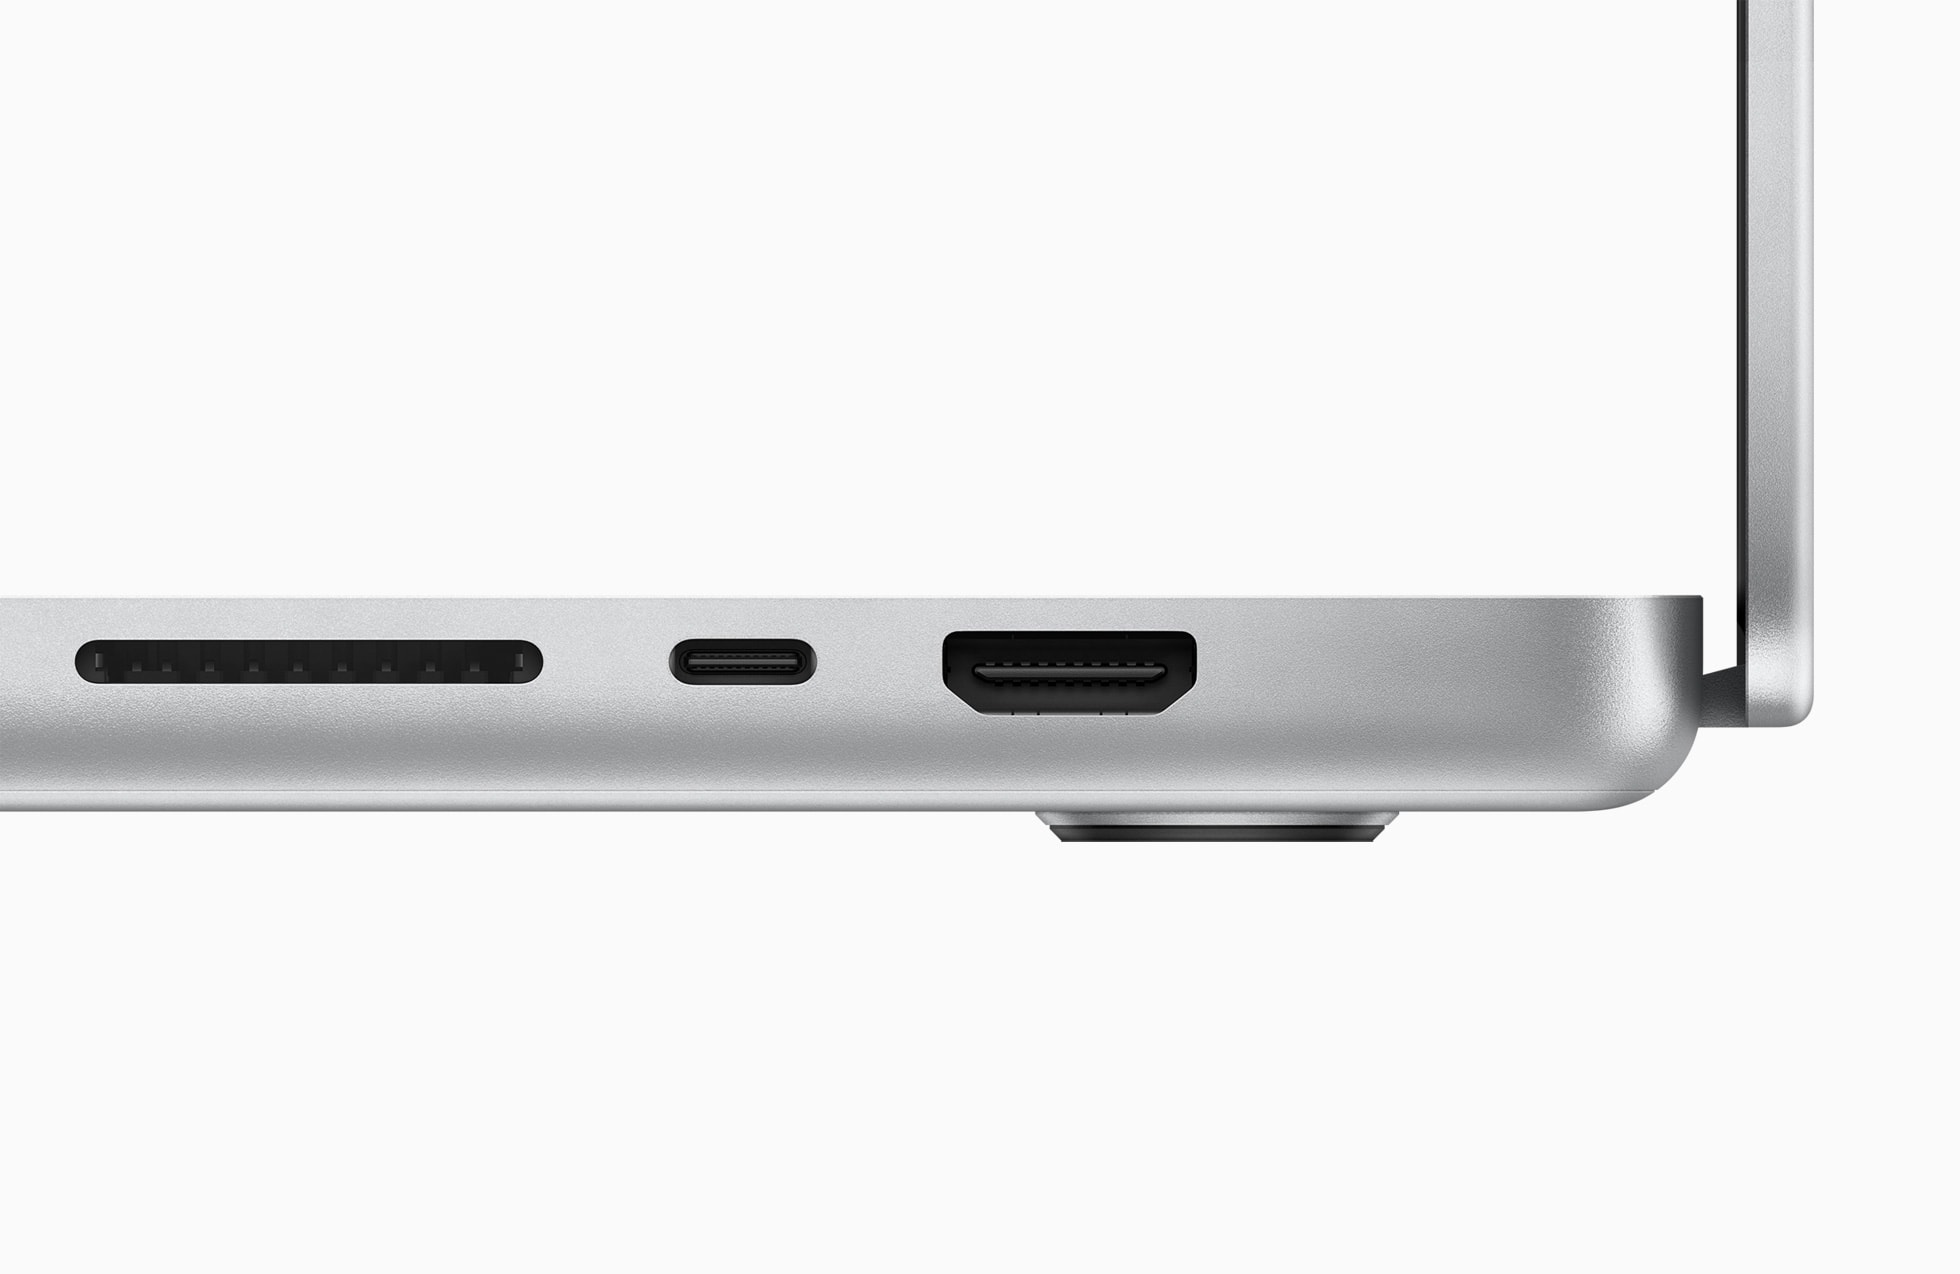 2021 MacBook Pro launch: ports are back, baby!